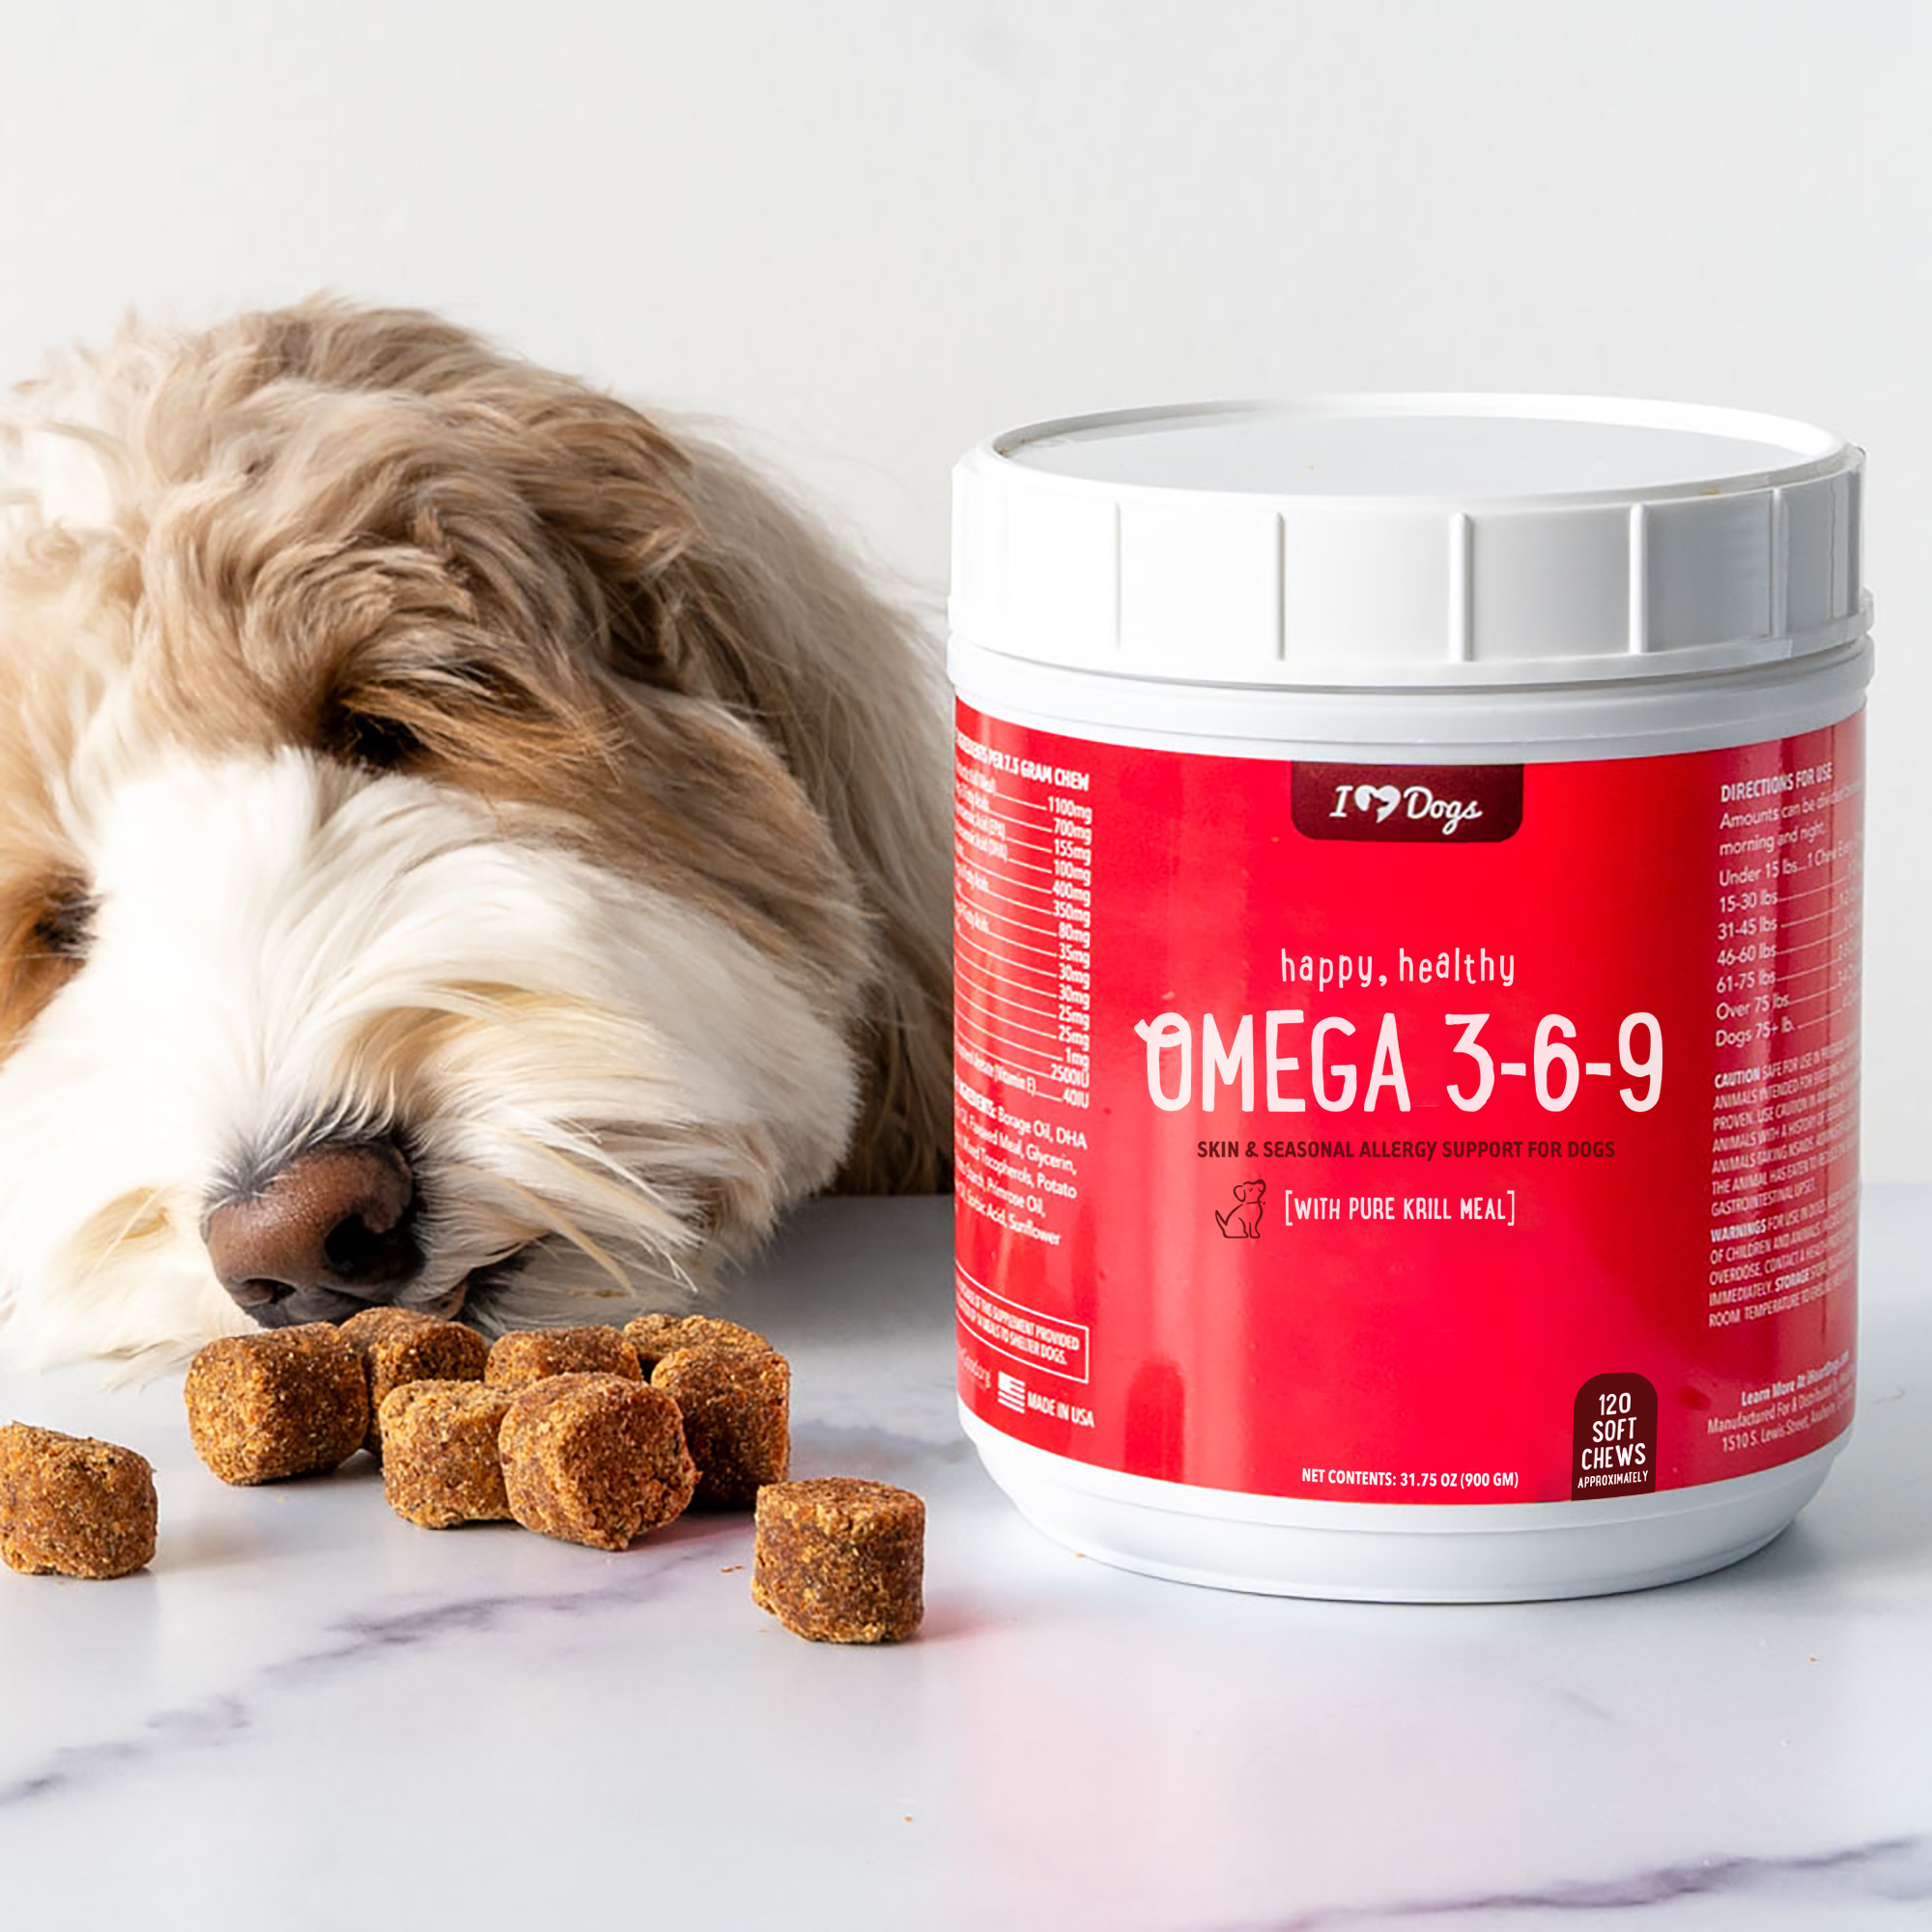 is omega 3 good for dogs